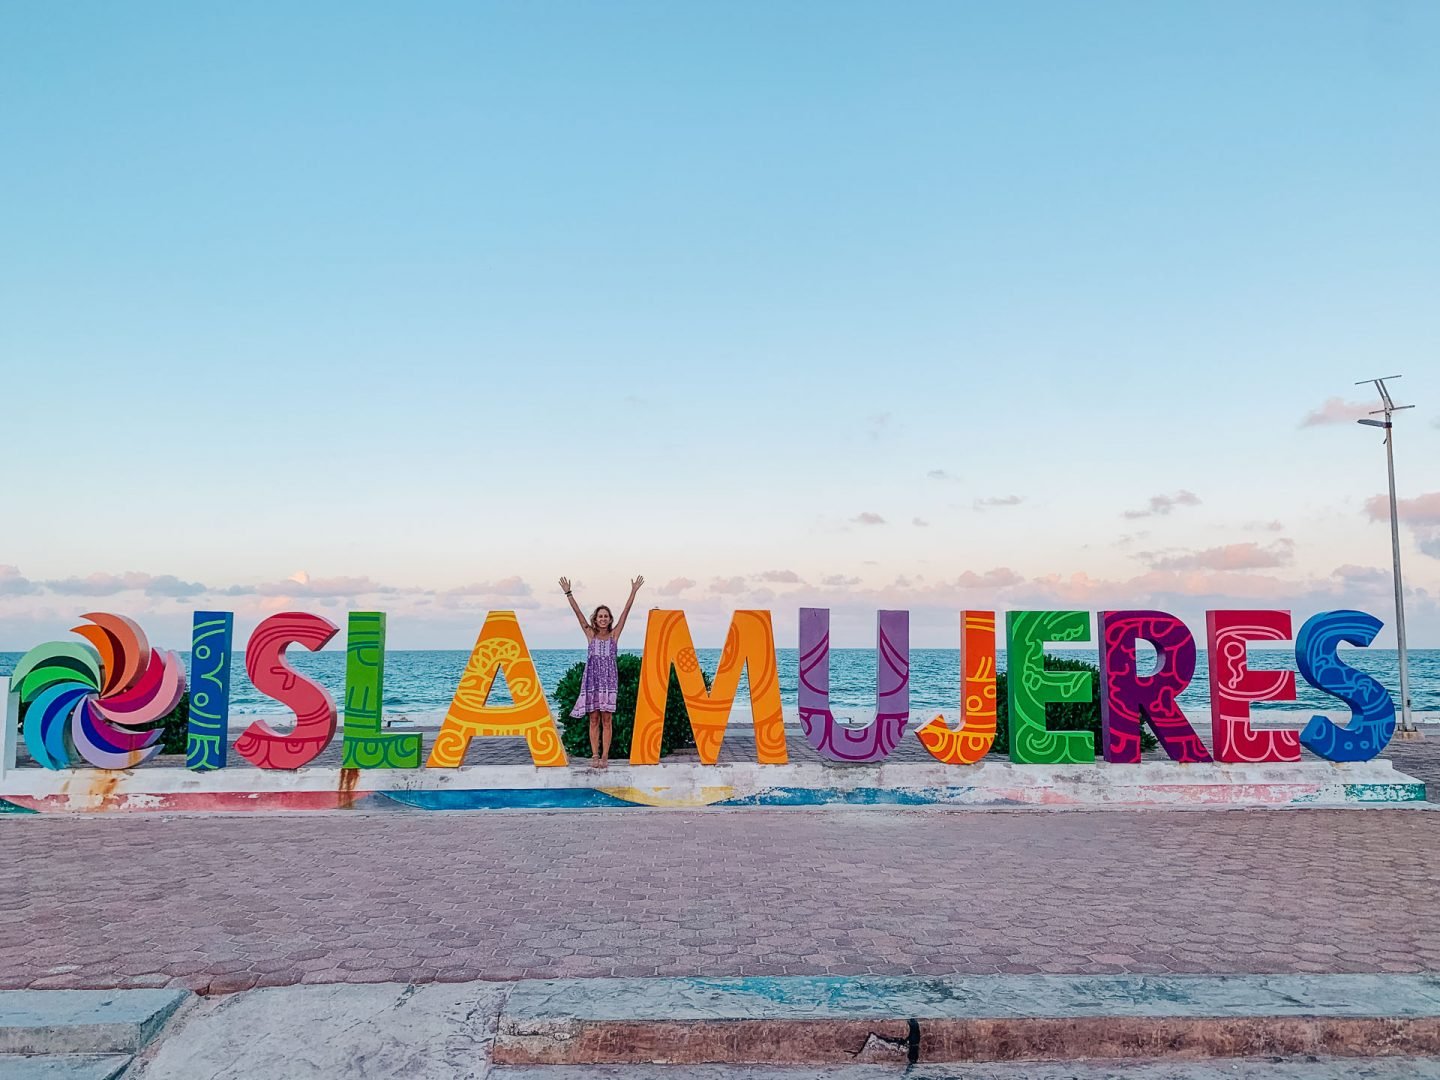 isla mujeres, things to do in isla mujeres, things to do on isla mujeres, isla mujeres things to do